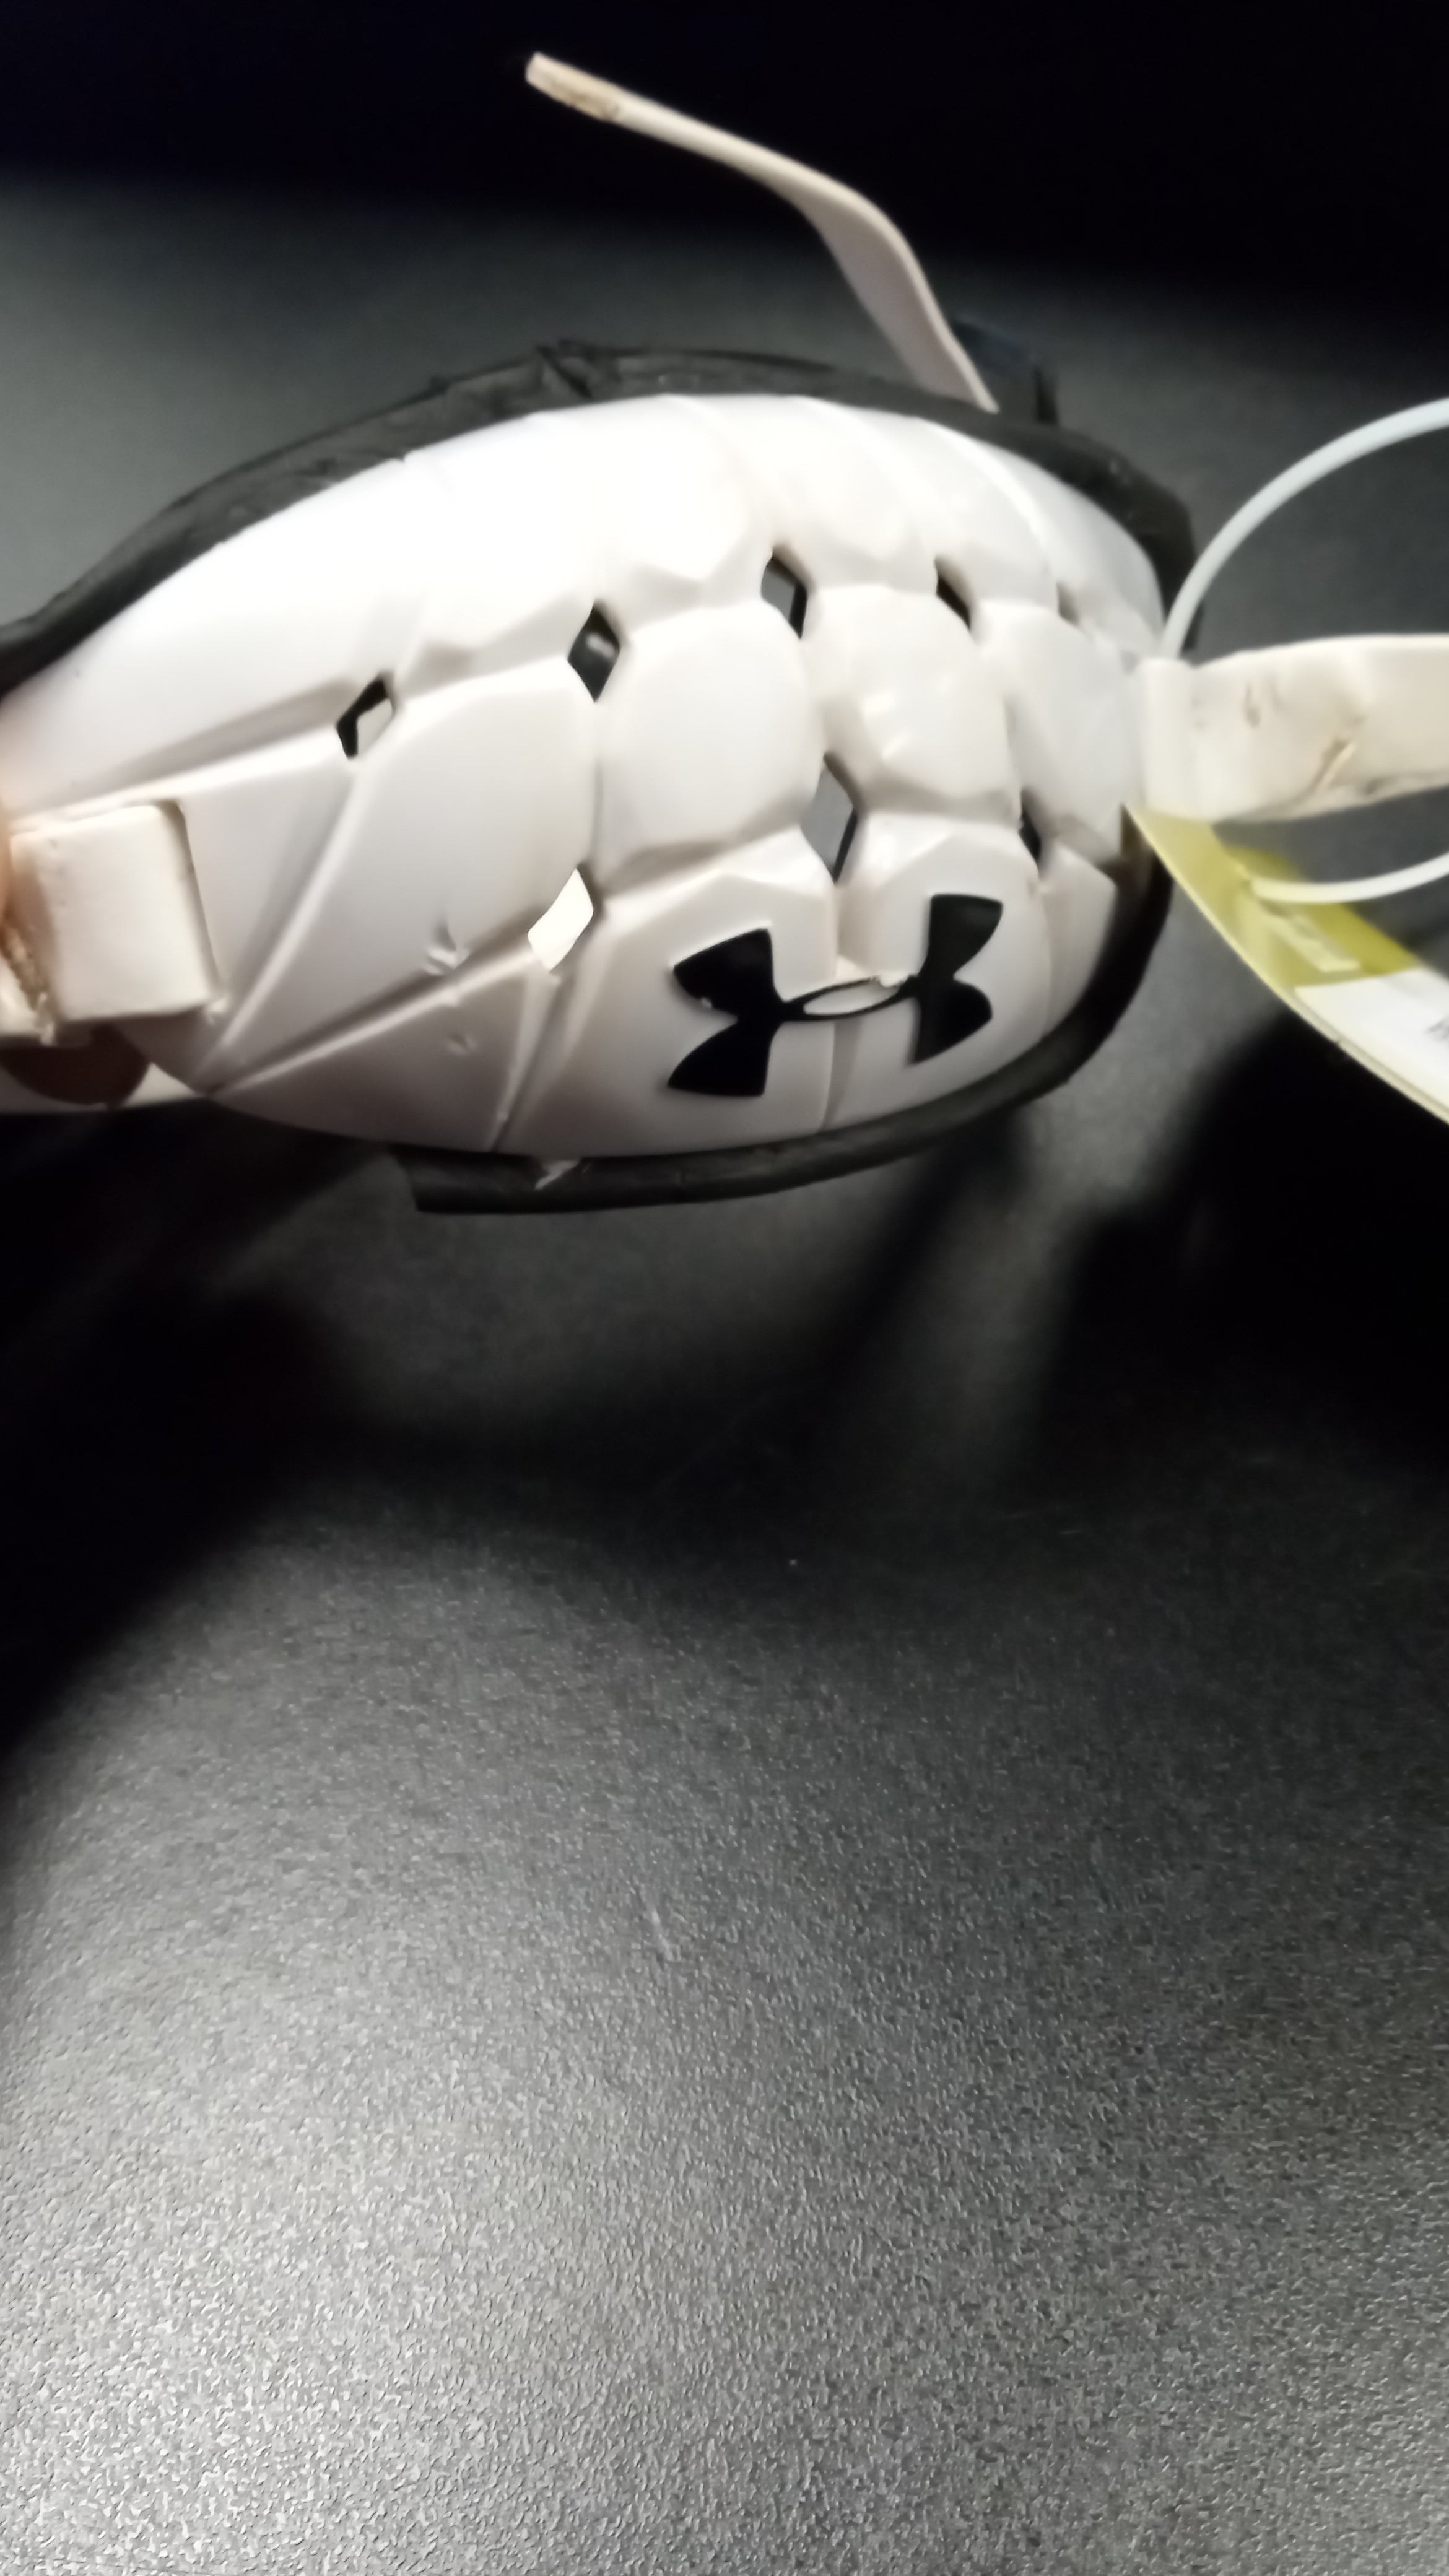 Used Under Armor Reversible Wrist Band – cssportinggoods